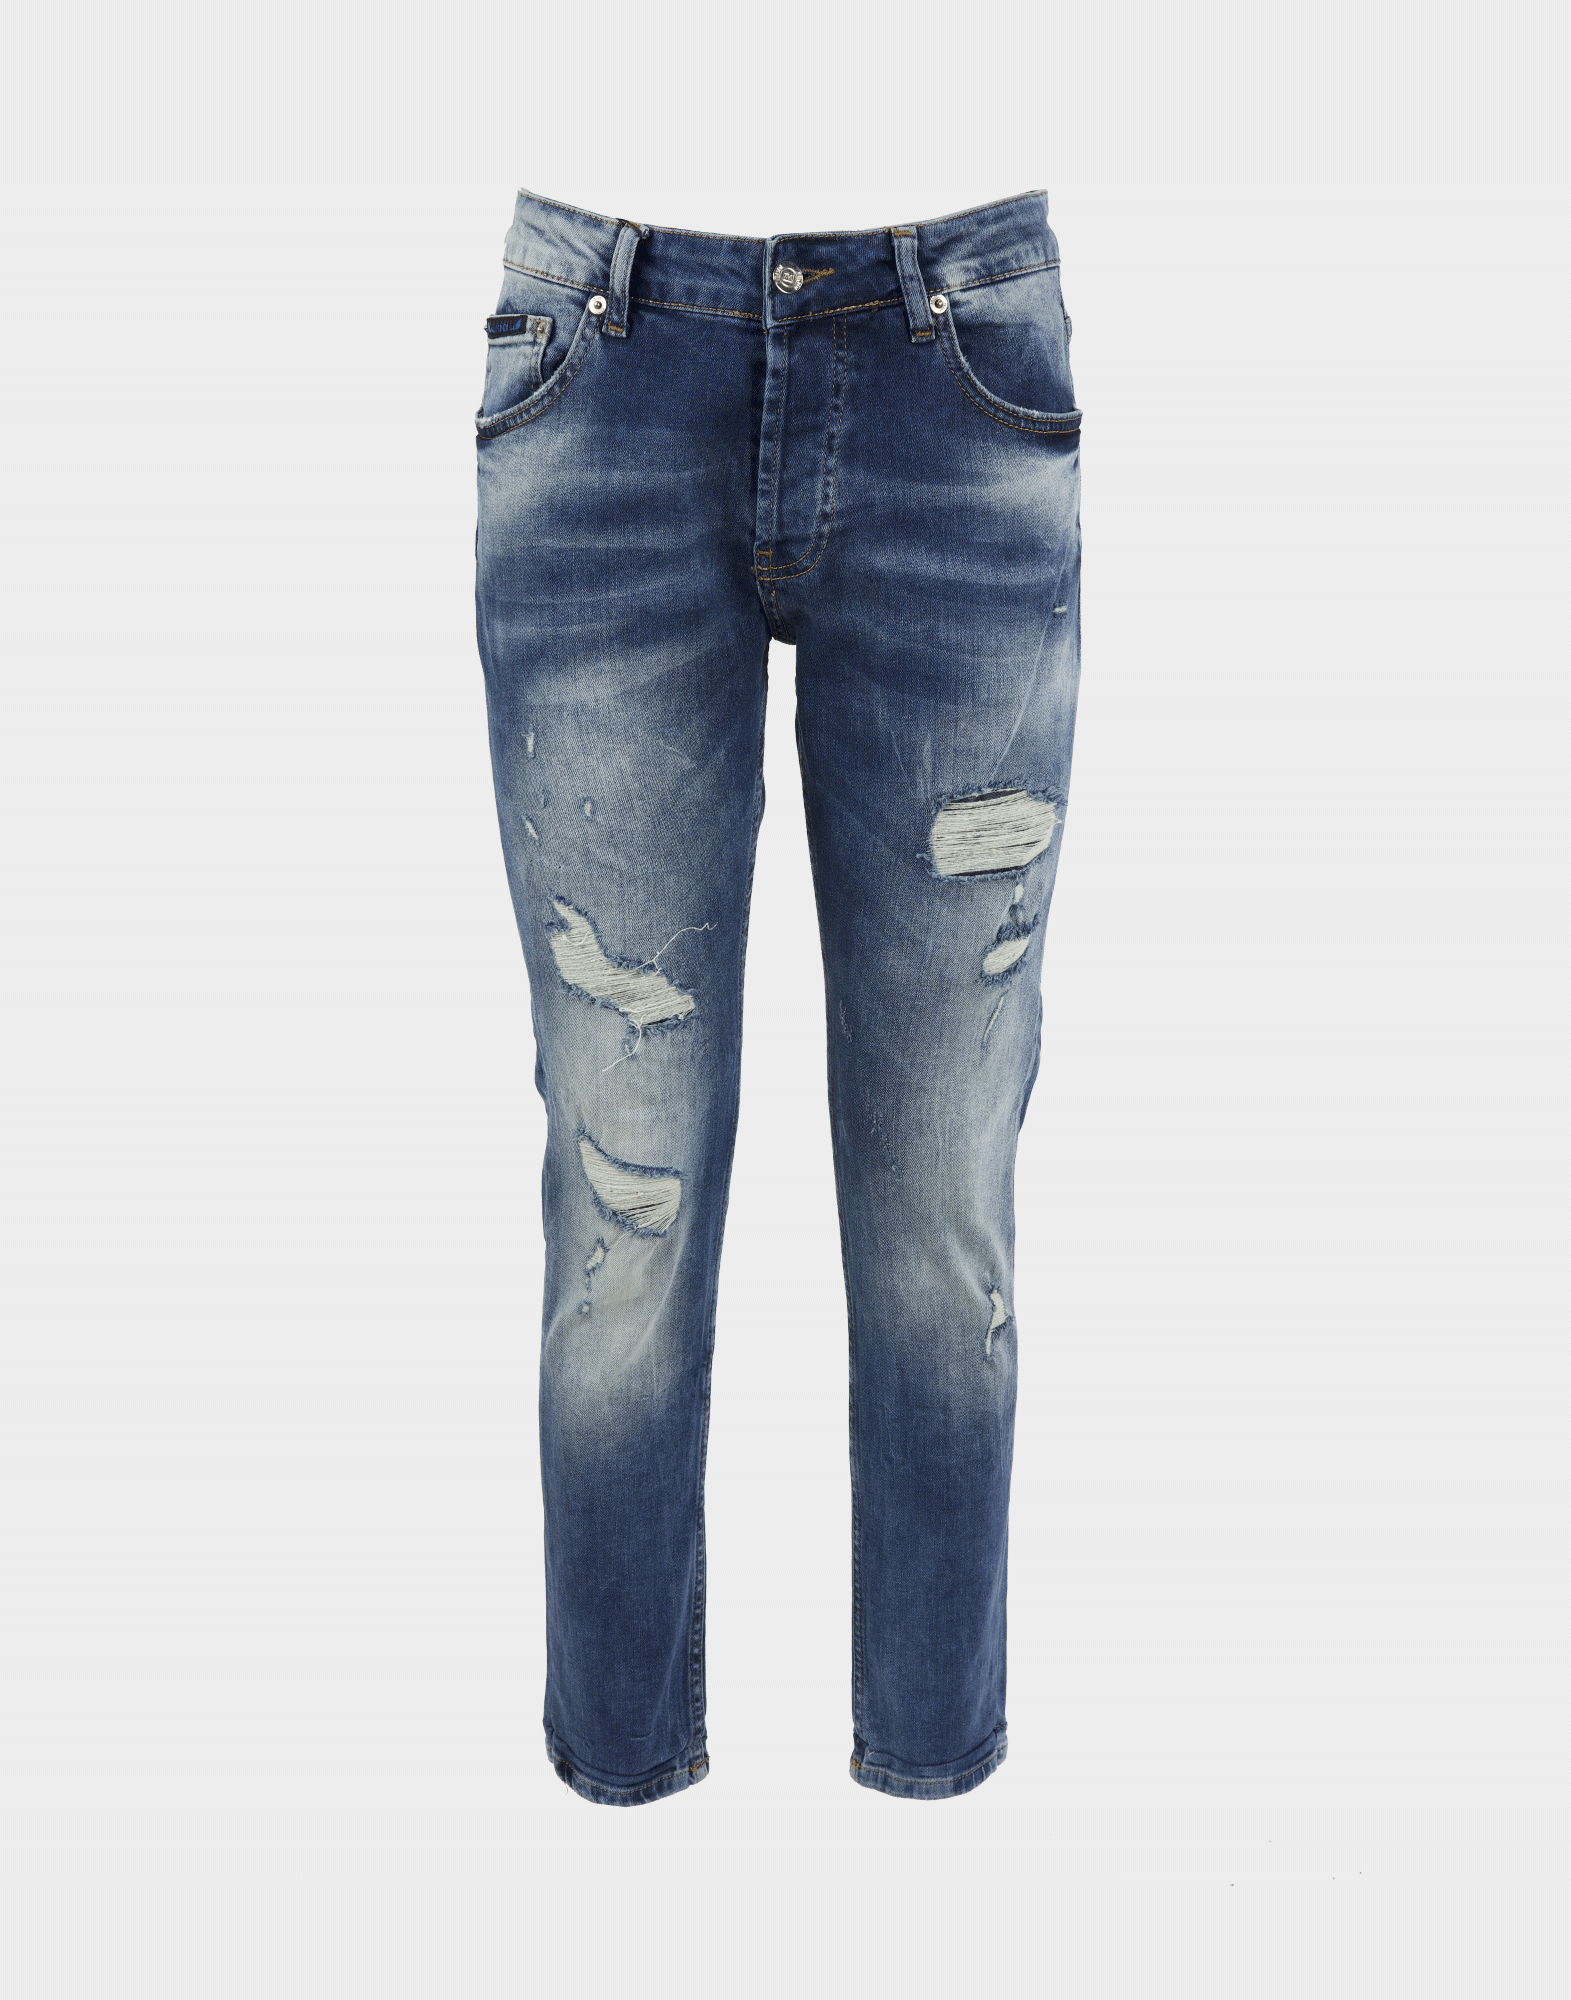 Women's denim jeans with distressing on the legs